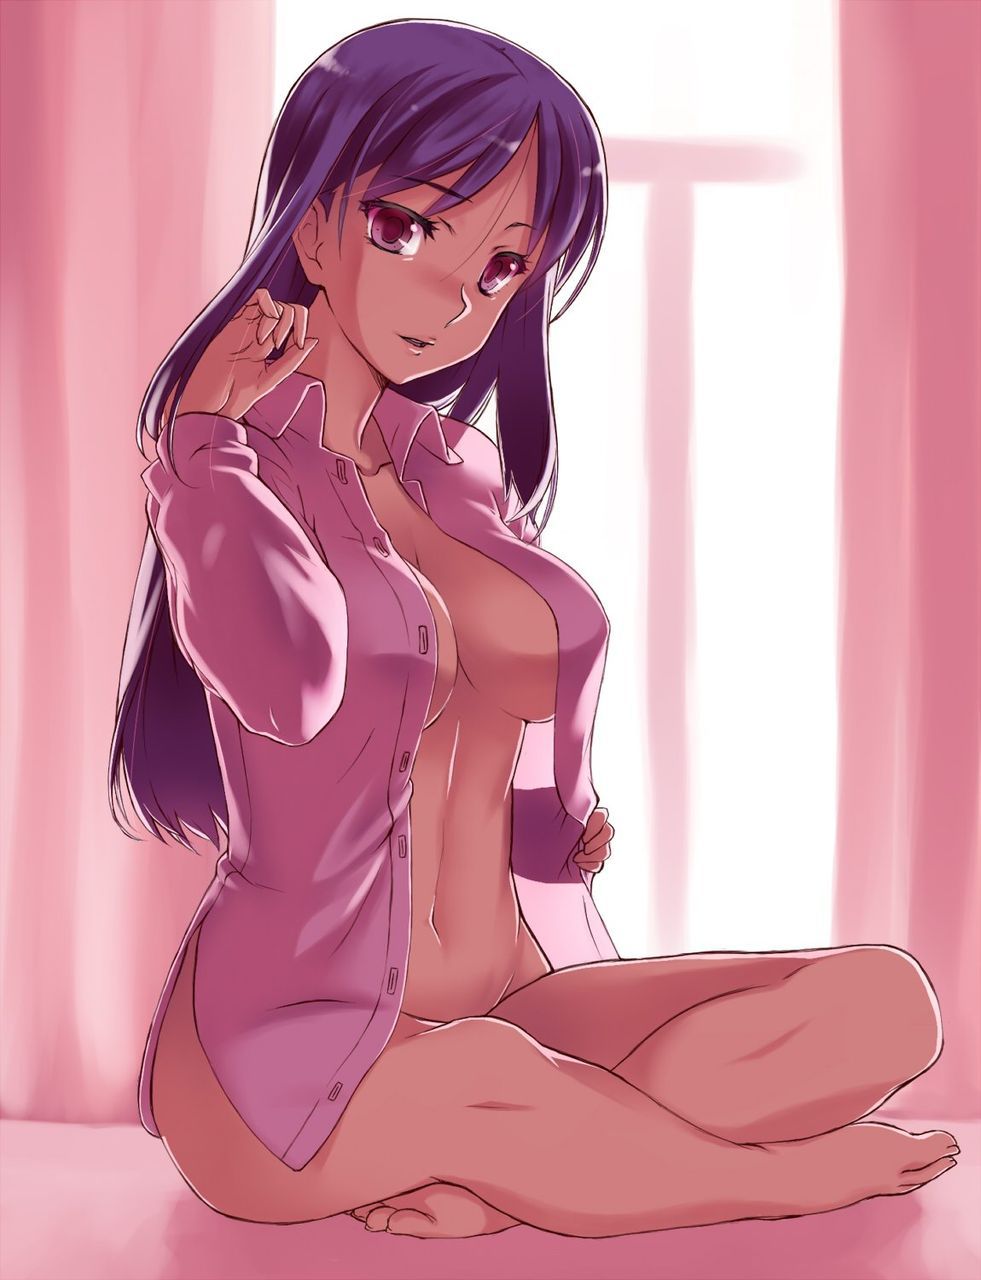 [2nd] Secondary image of the girl in the erotic naked shirt appearance than nude part 5 [Naked y shirt] 16